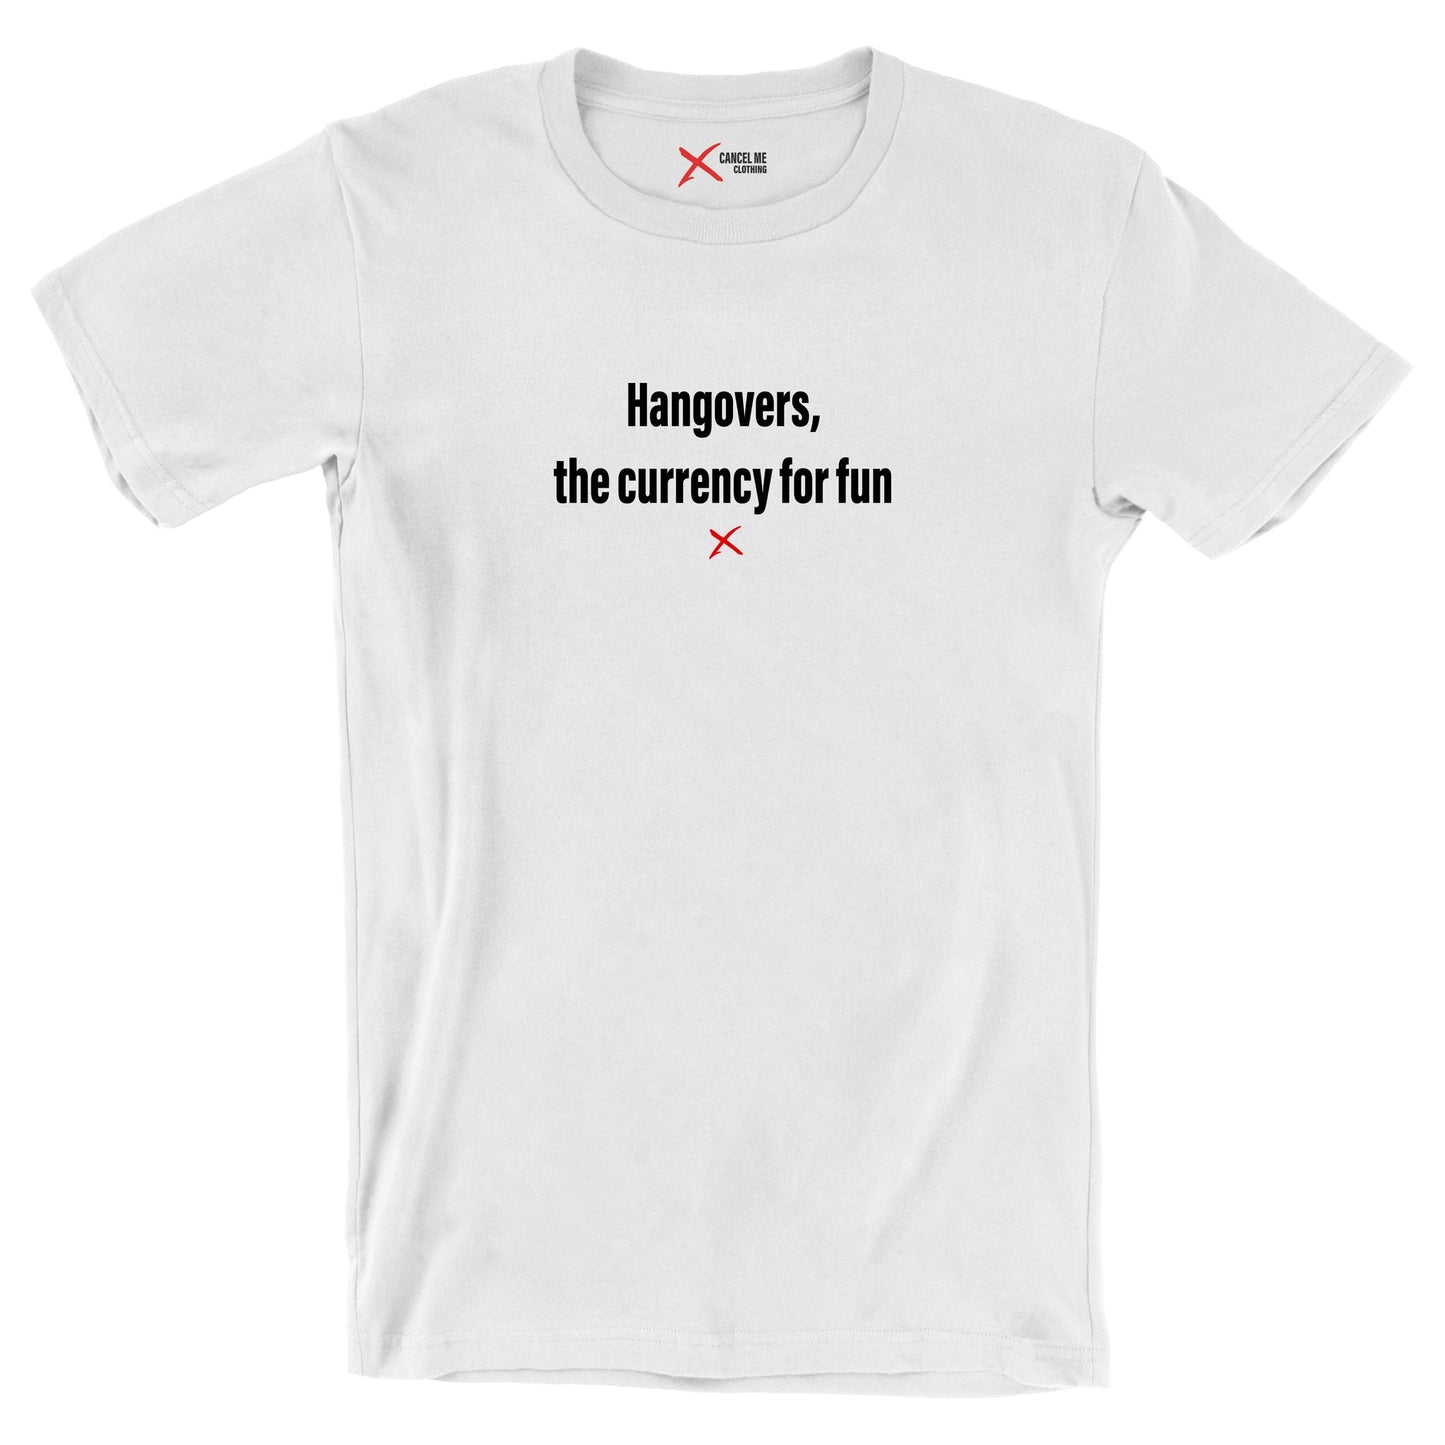 Hangovers, the currency for fun - Shirt